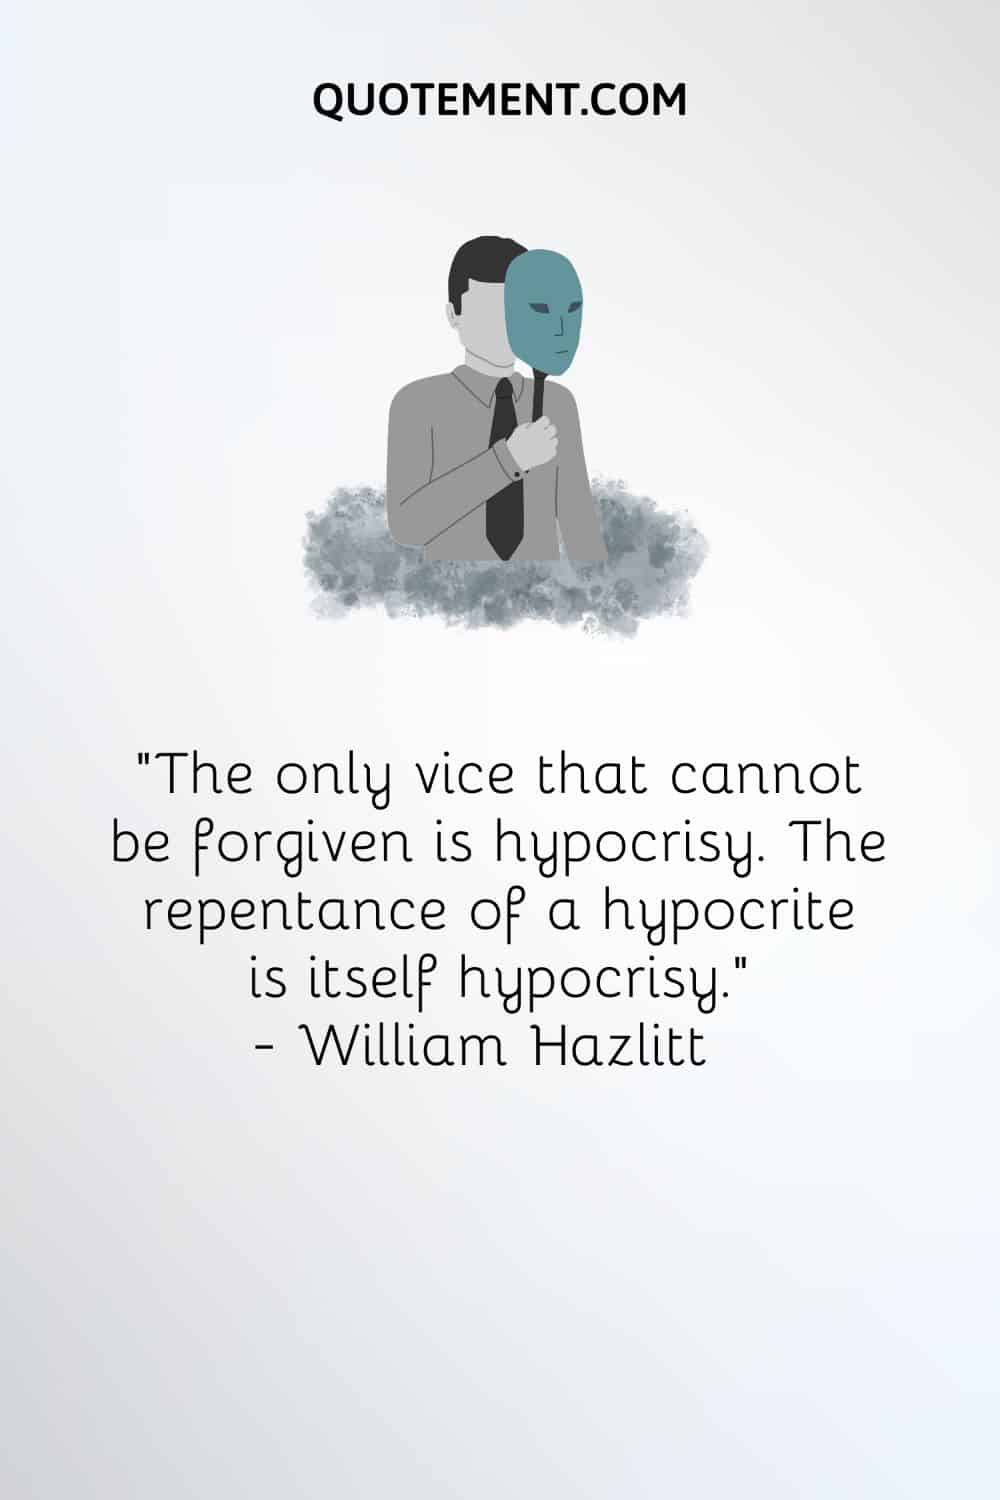 “The only vice that cannot be forgiven is hypocrisy. The repentance of a hypocrite is itself hypocrisy.” — William Hazlitt